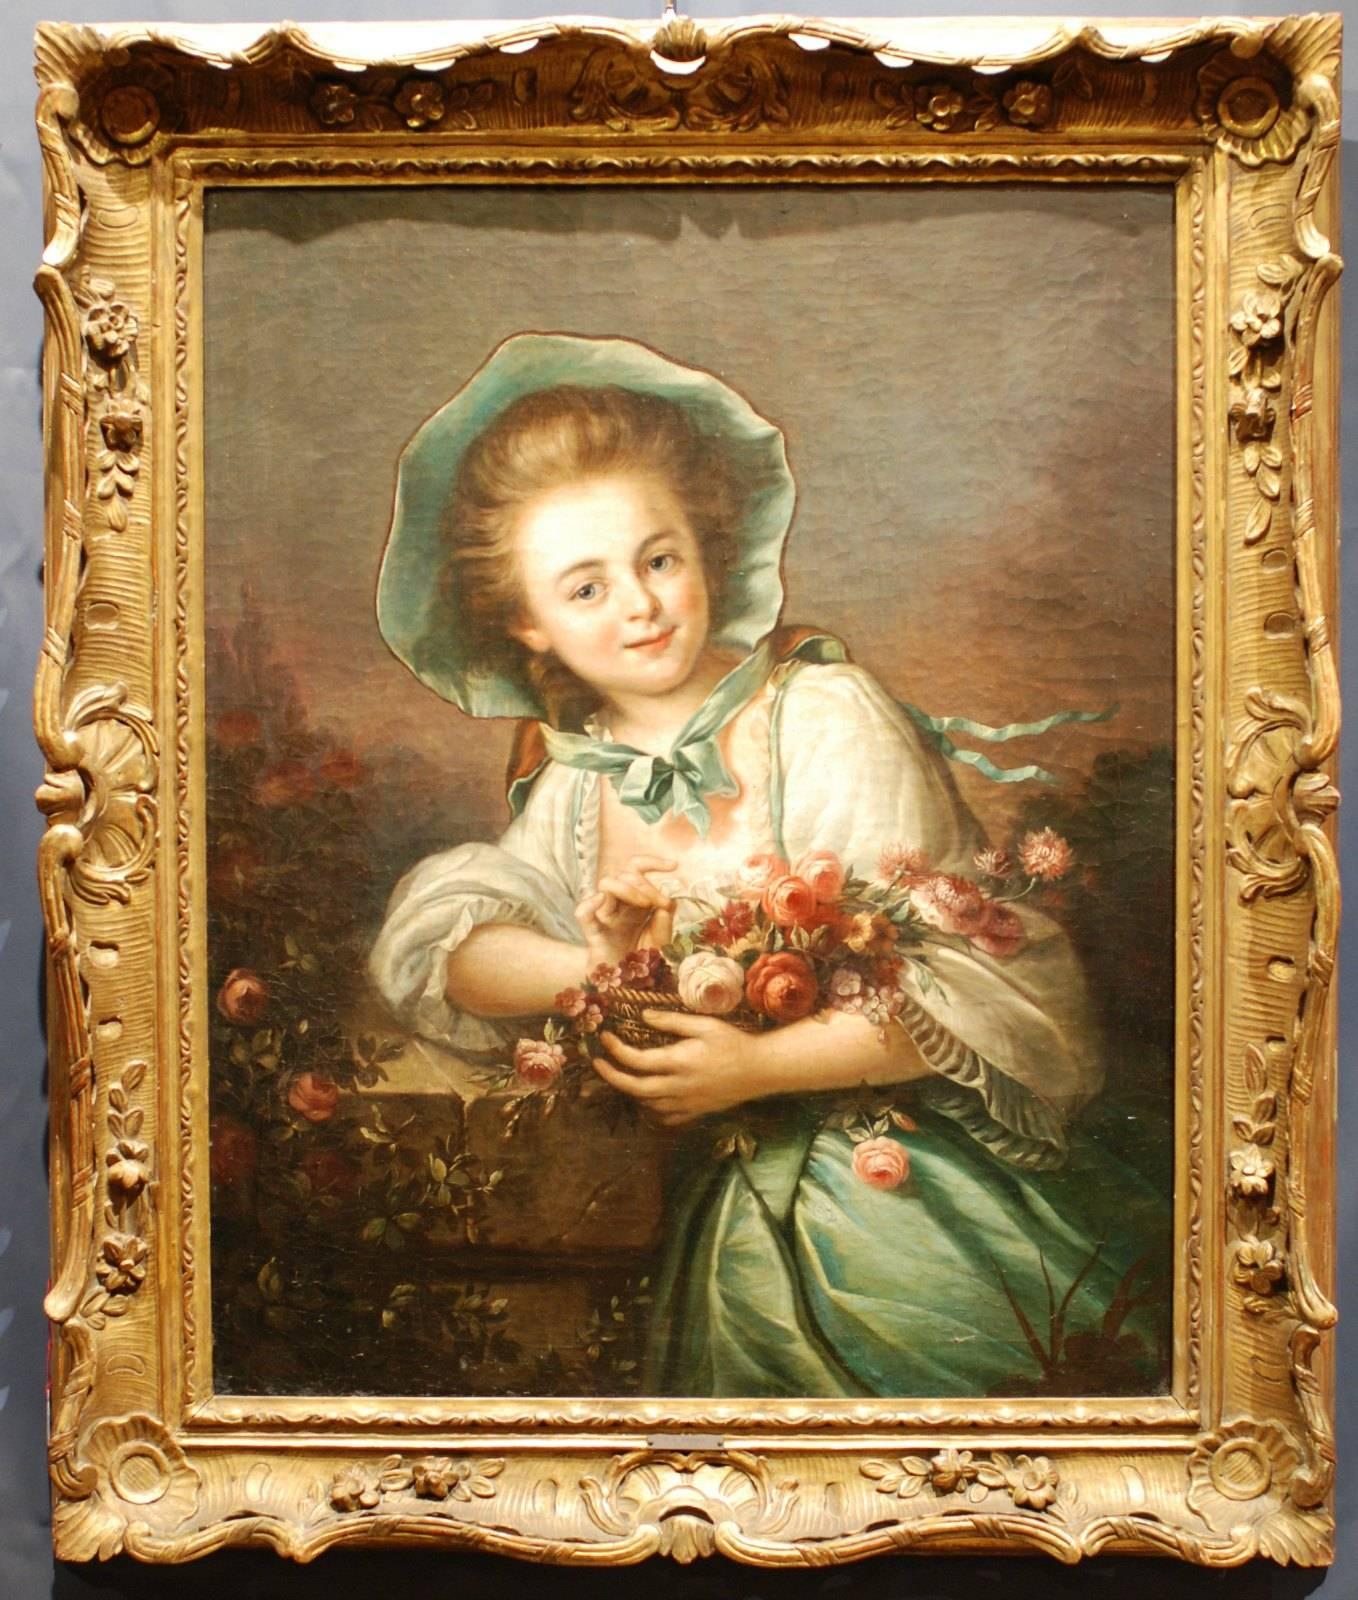 Young girl holding flowers in her arms in a basket. Painting on canvas.
French School late 18th century. According Drouais. Frame is late 19th century.
François-Hubert Drouais 1727-1775. (Painting 80 x 65 cm).